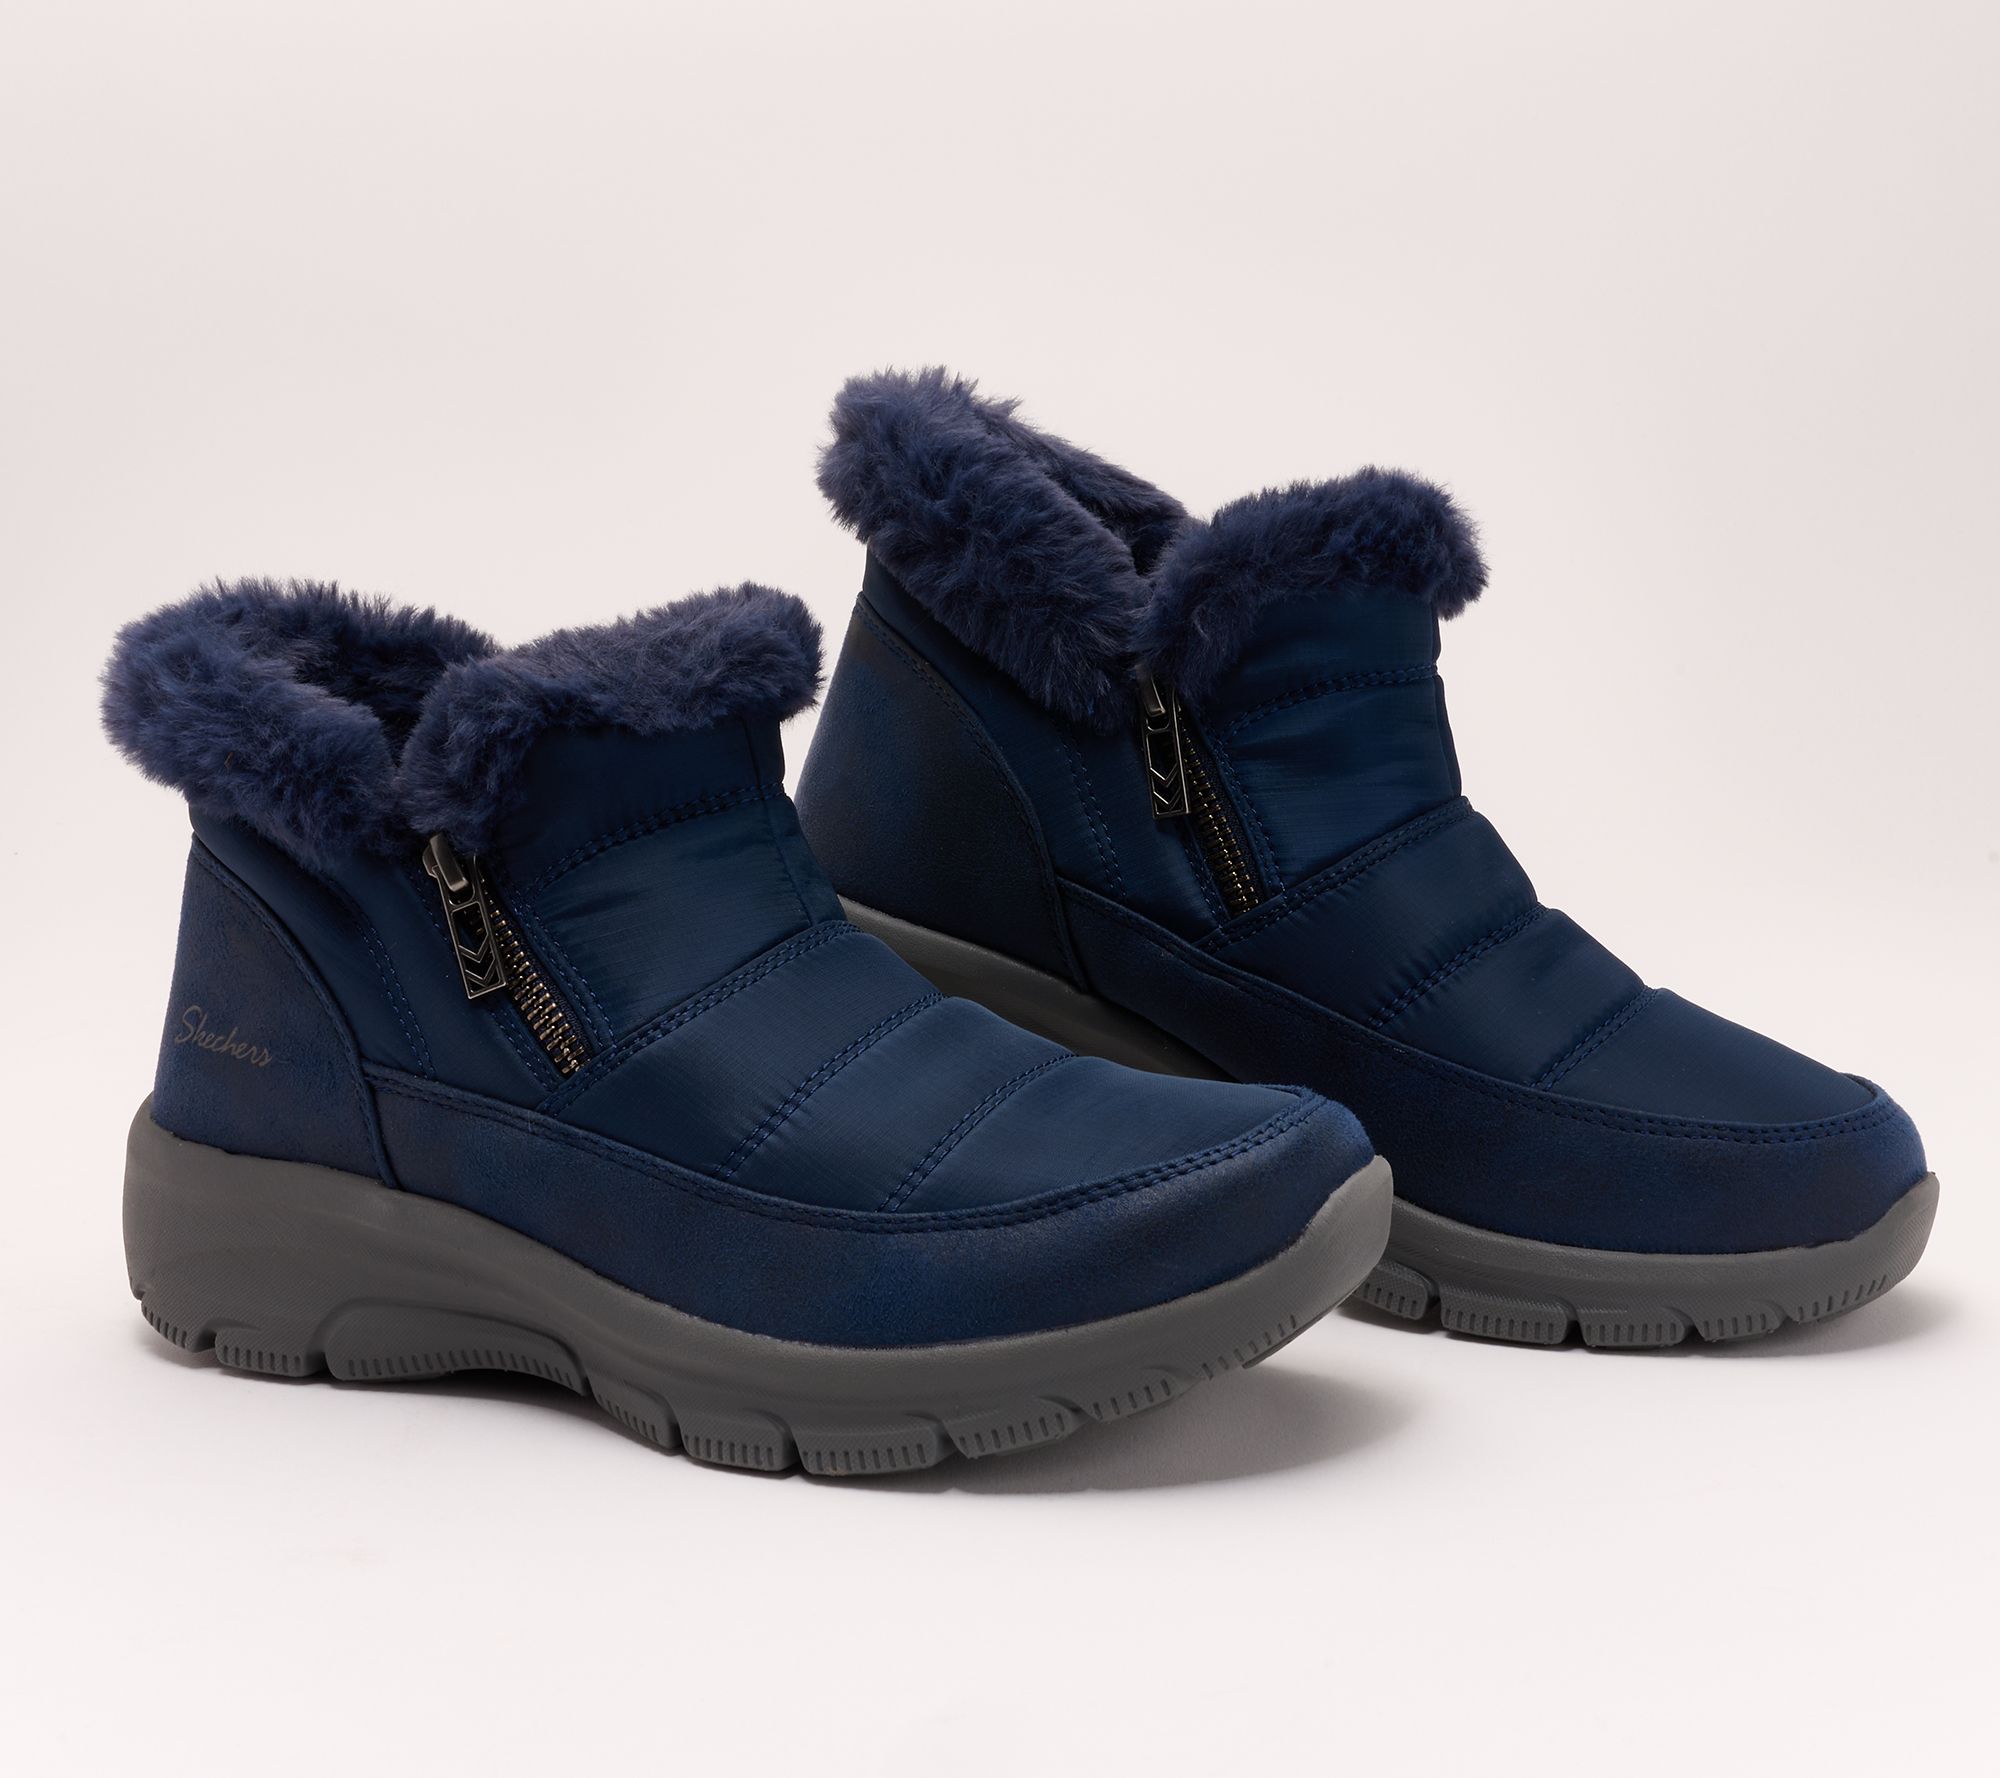 Skechers Easy Going Water Repellent Vegan Boots- Frosty Charm - QVC.com